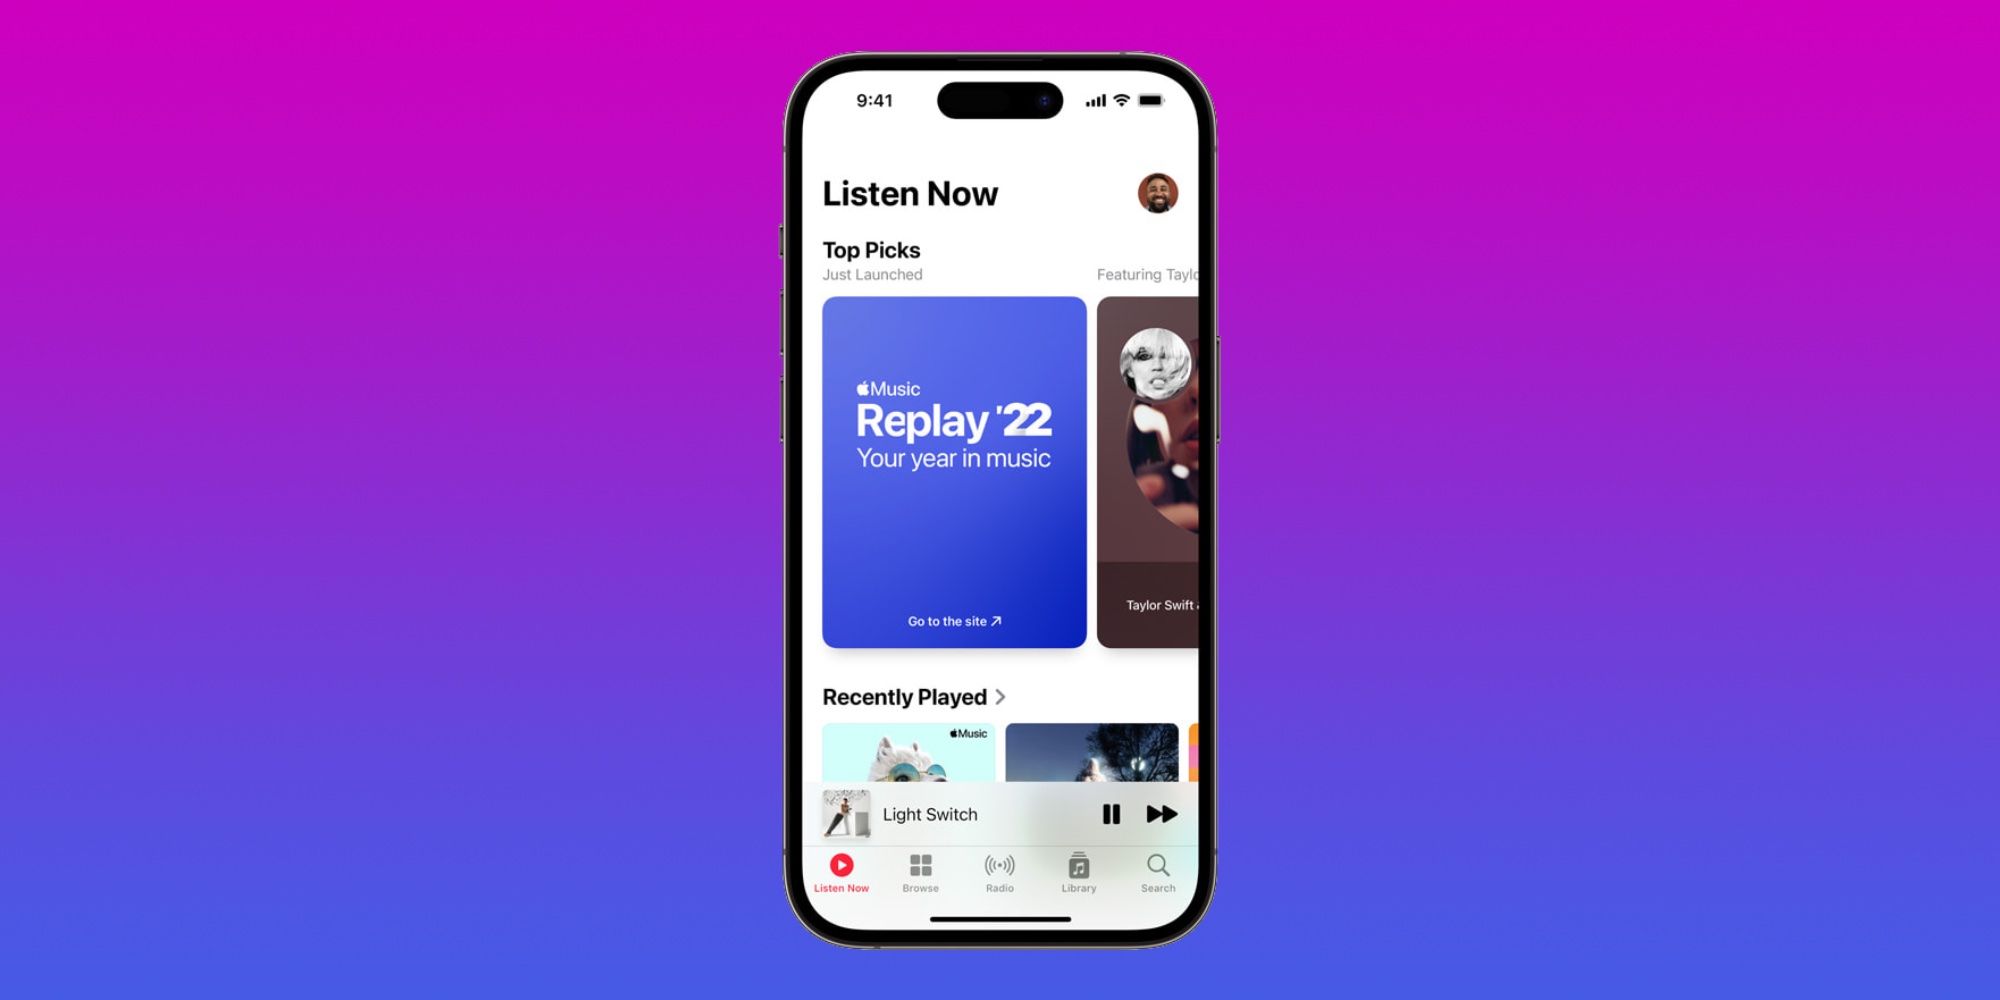 The Apple Music app on iPhone 14 Pro showing a Replay '22 playlist card.